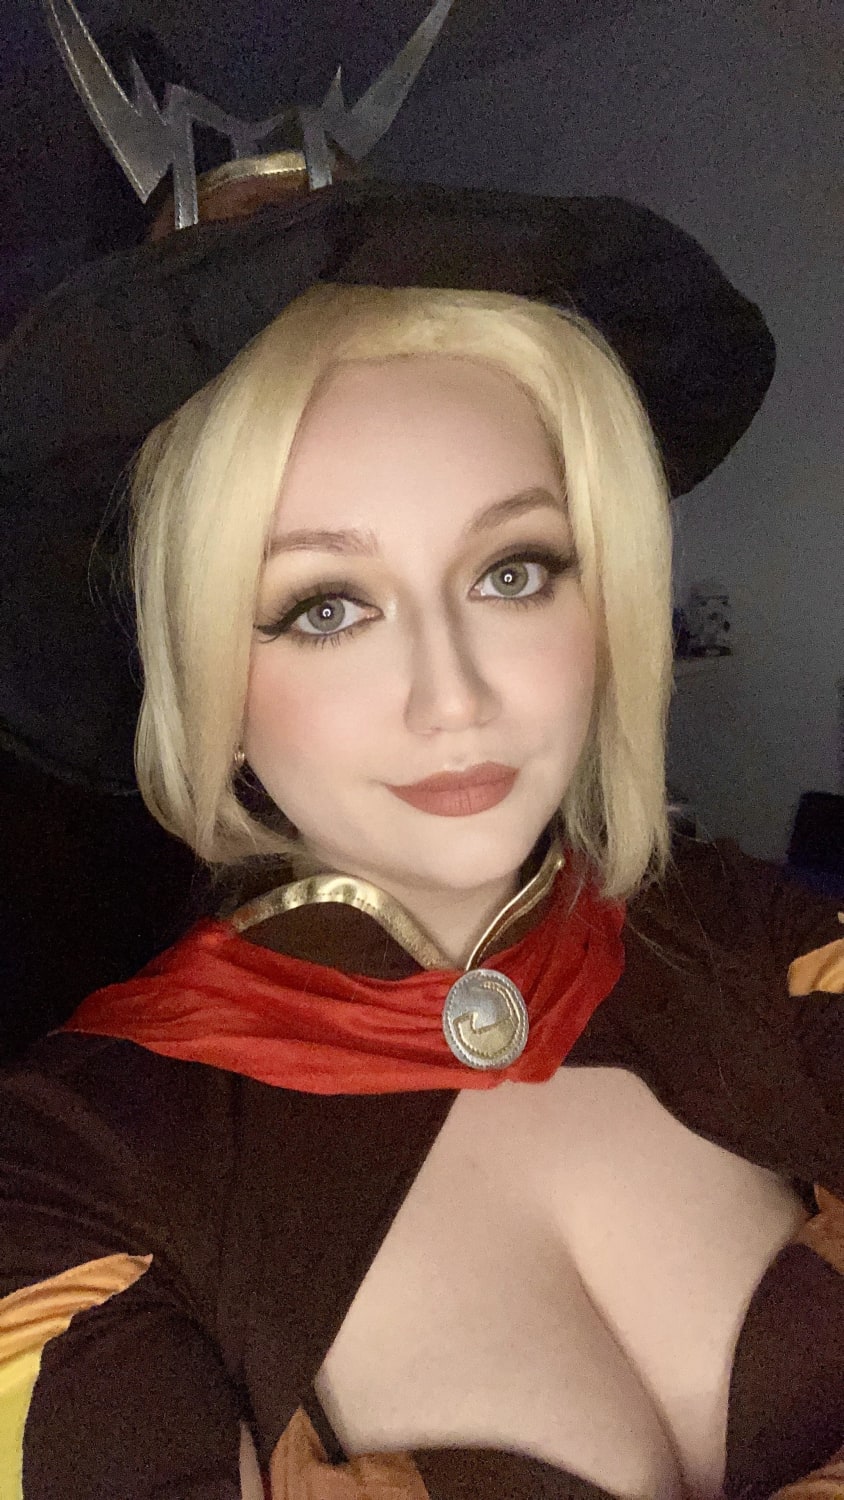 Witch Mercy close up [self]